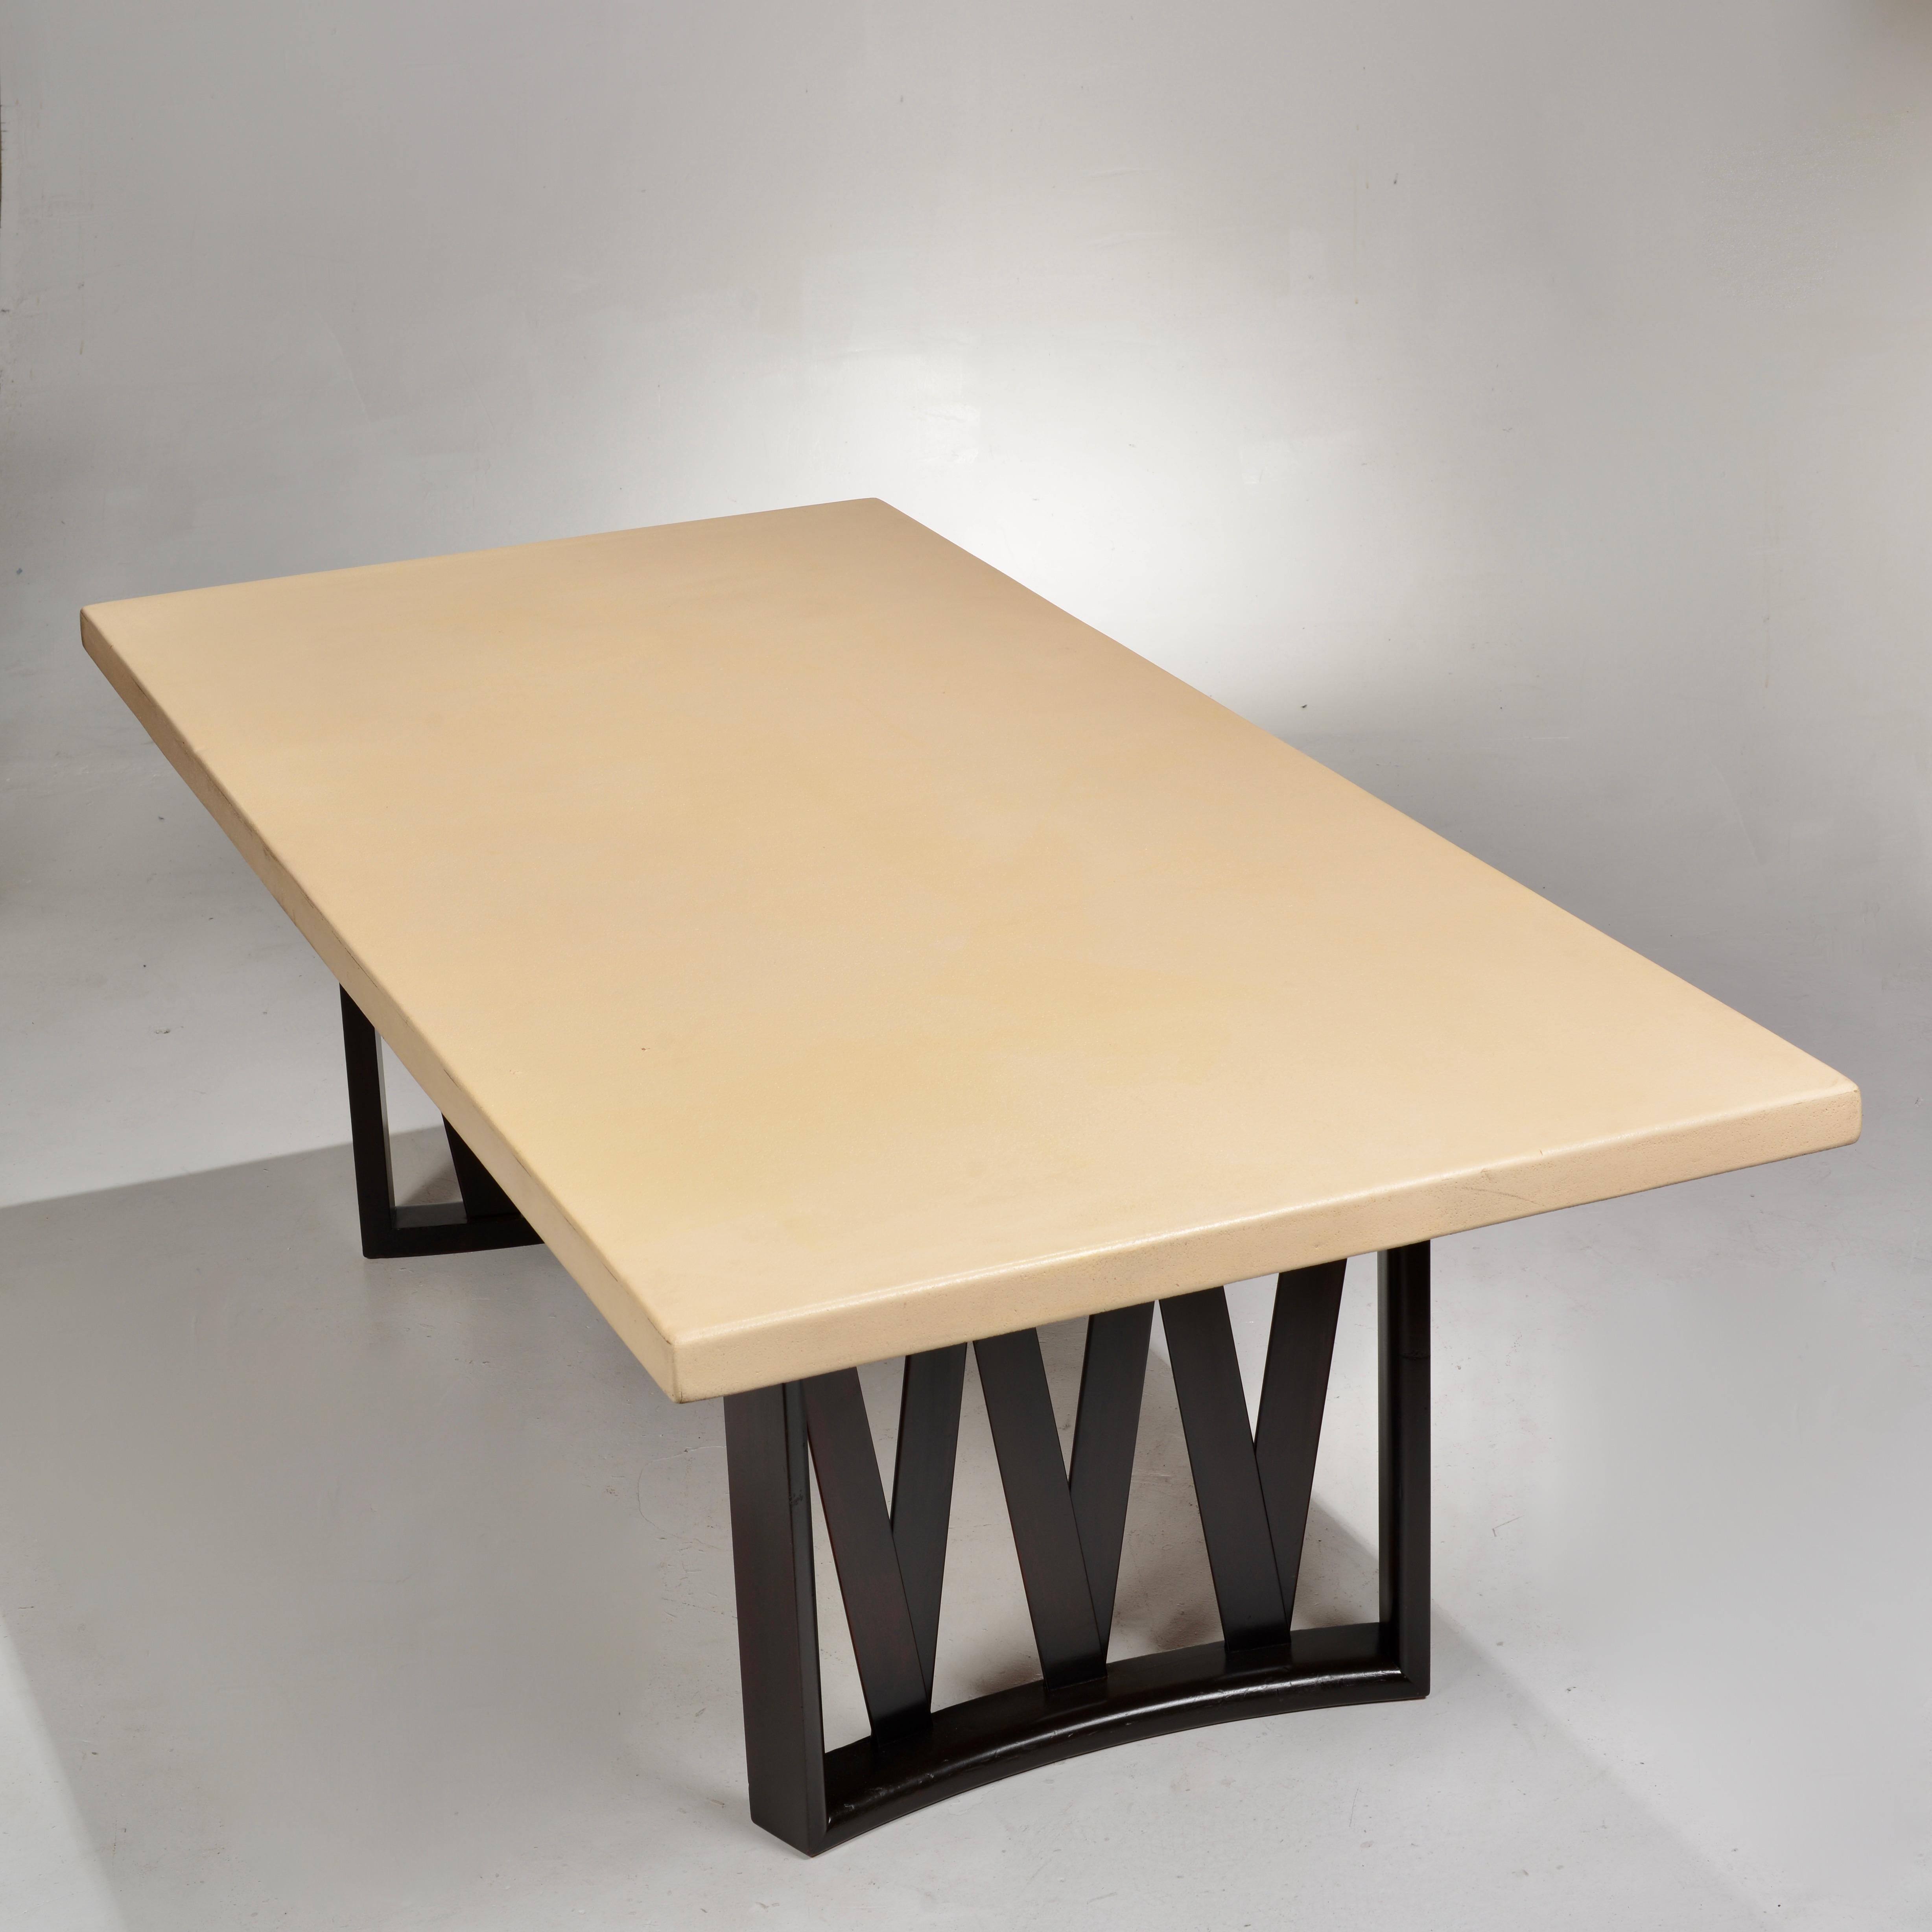 Lacquered Cork Top Dining Table by Paul Frankl for Johnson Furniture Co, c1950 For Sale